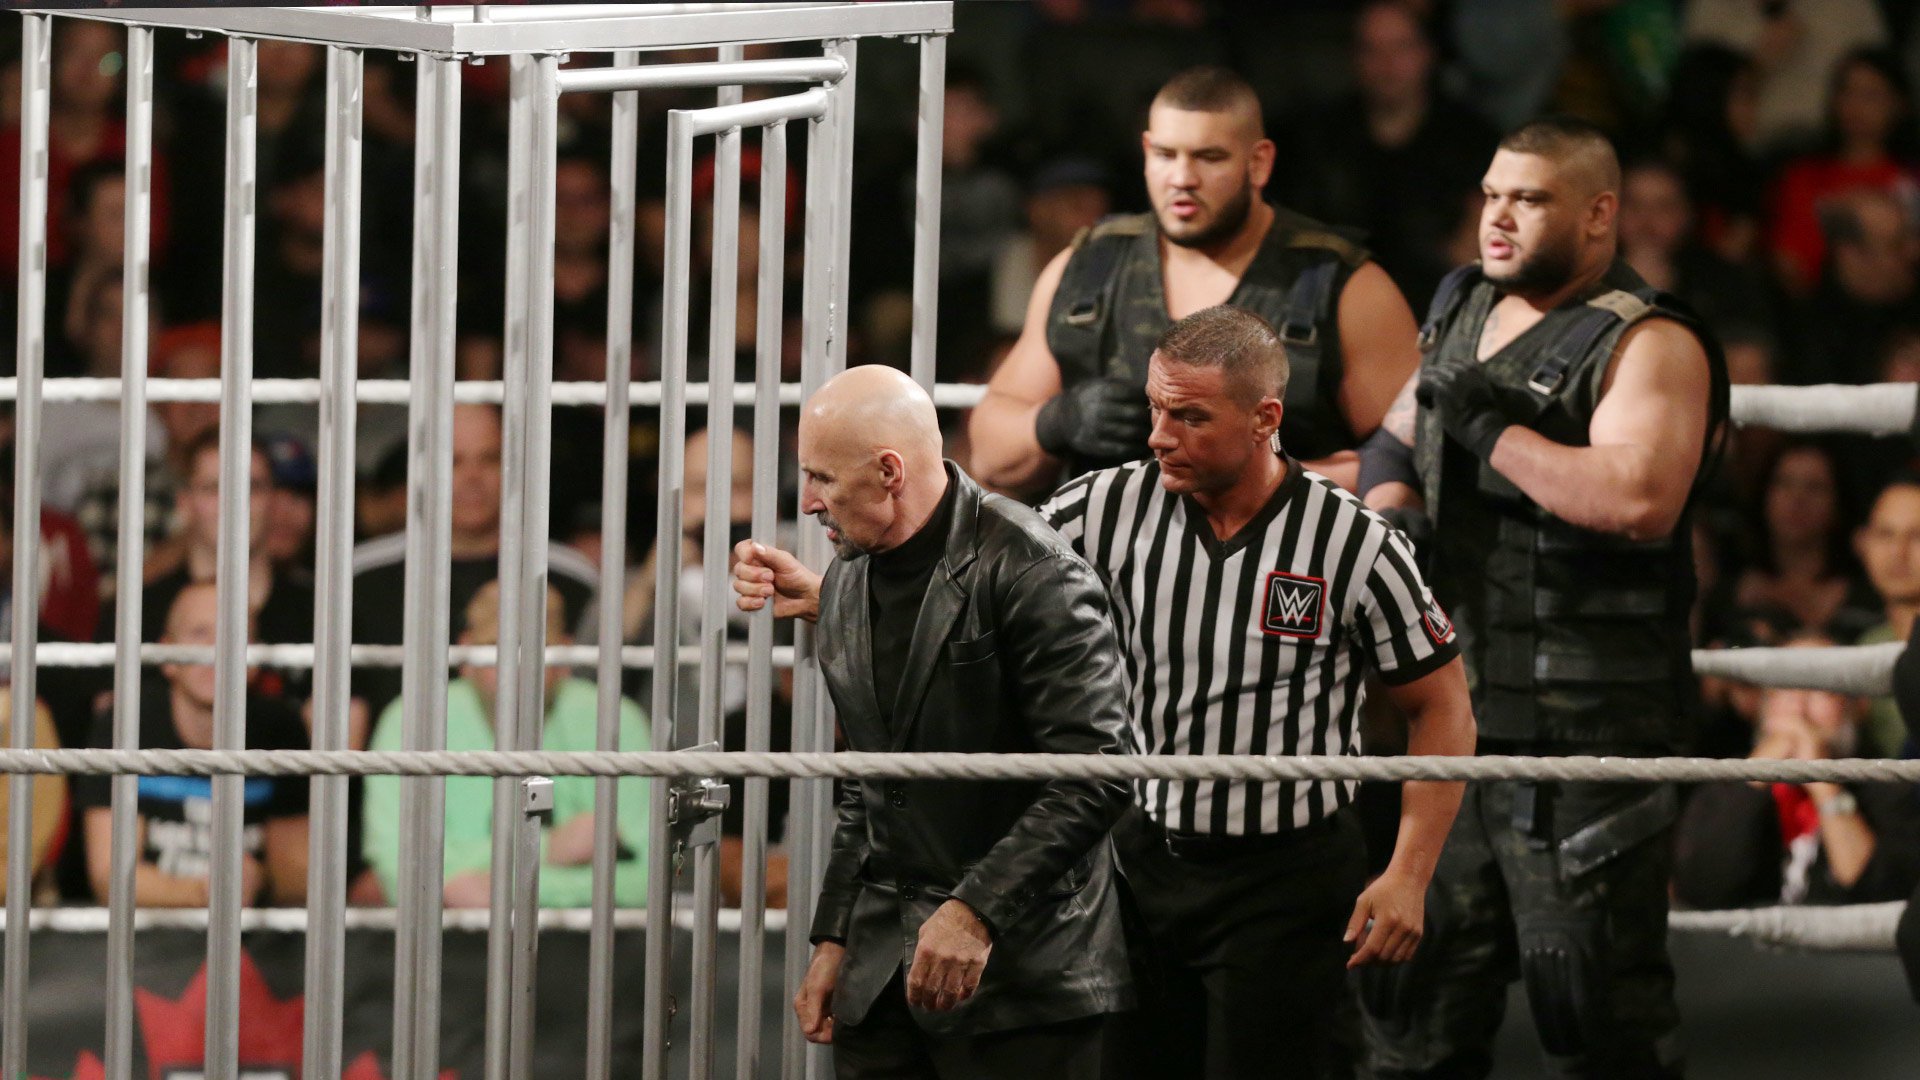 The Authors of Pain def. TM61 to win the Dusty Rhodes Tag Team Classic with Paul Ellering suspended above the ring in the Crash Cage | WWE